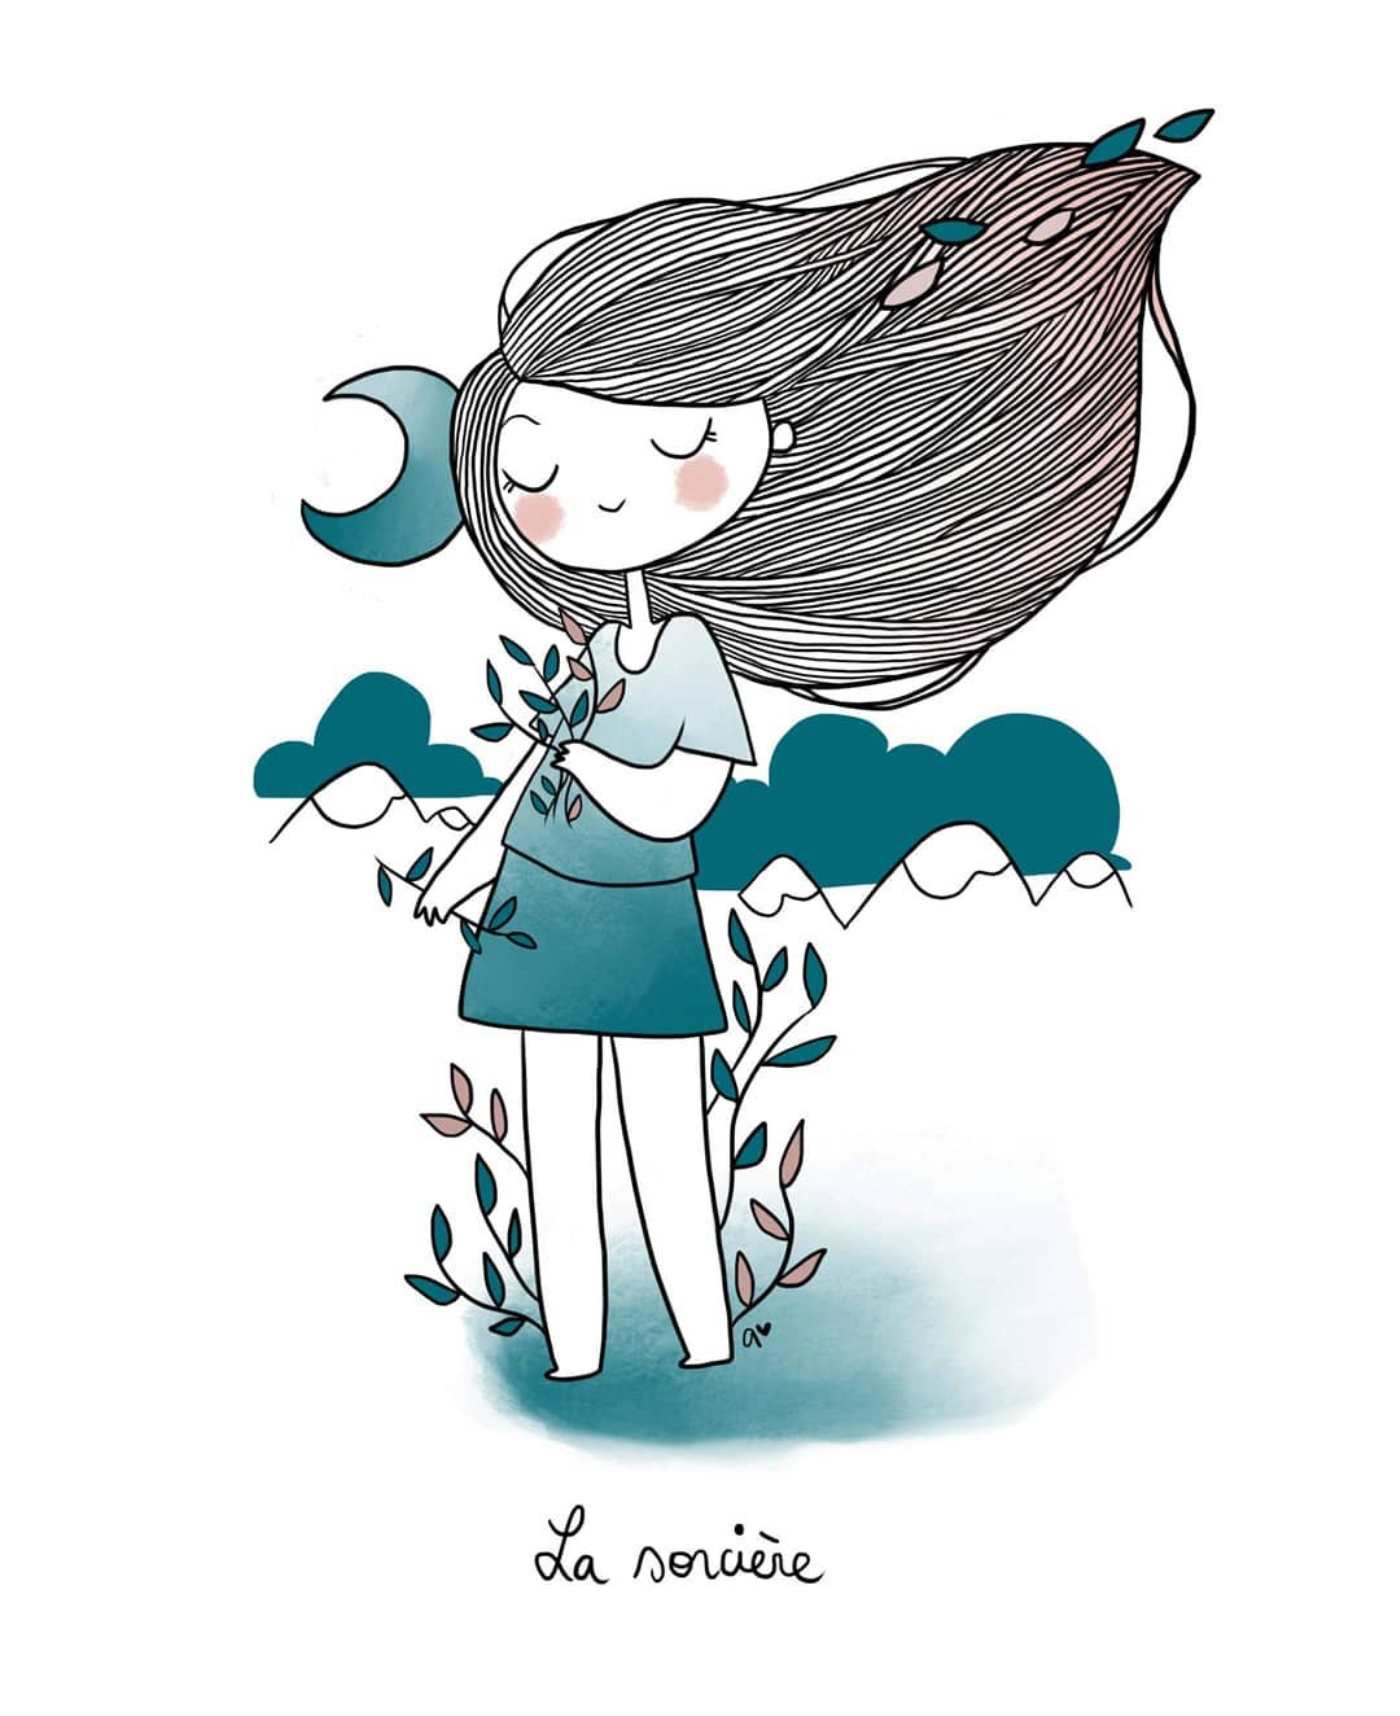 Illustration of Girl with Long Flying Moon Light